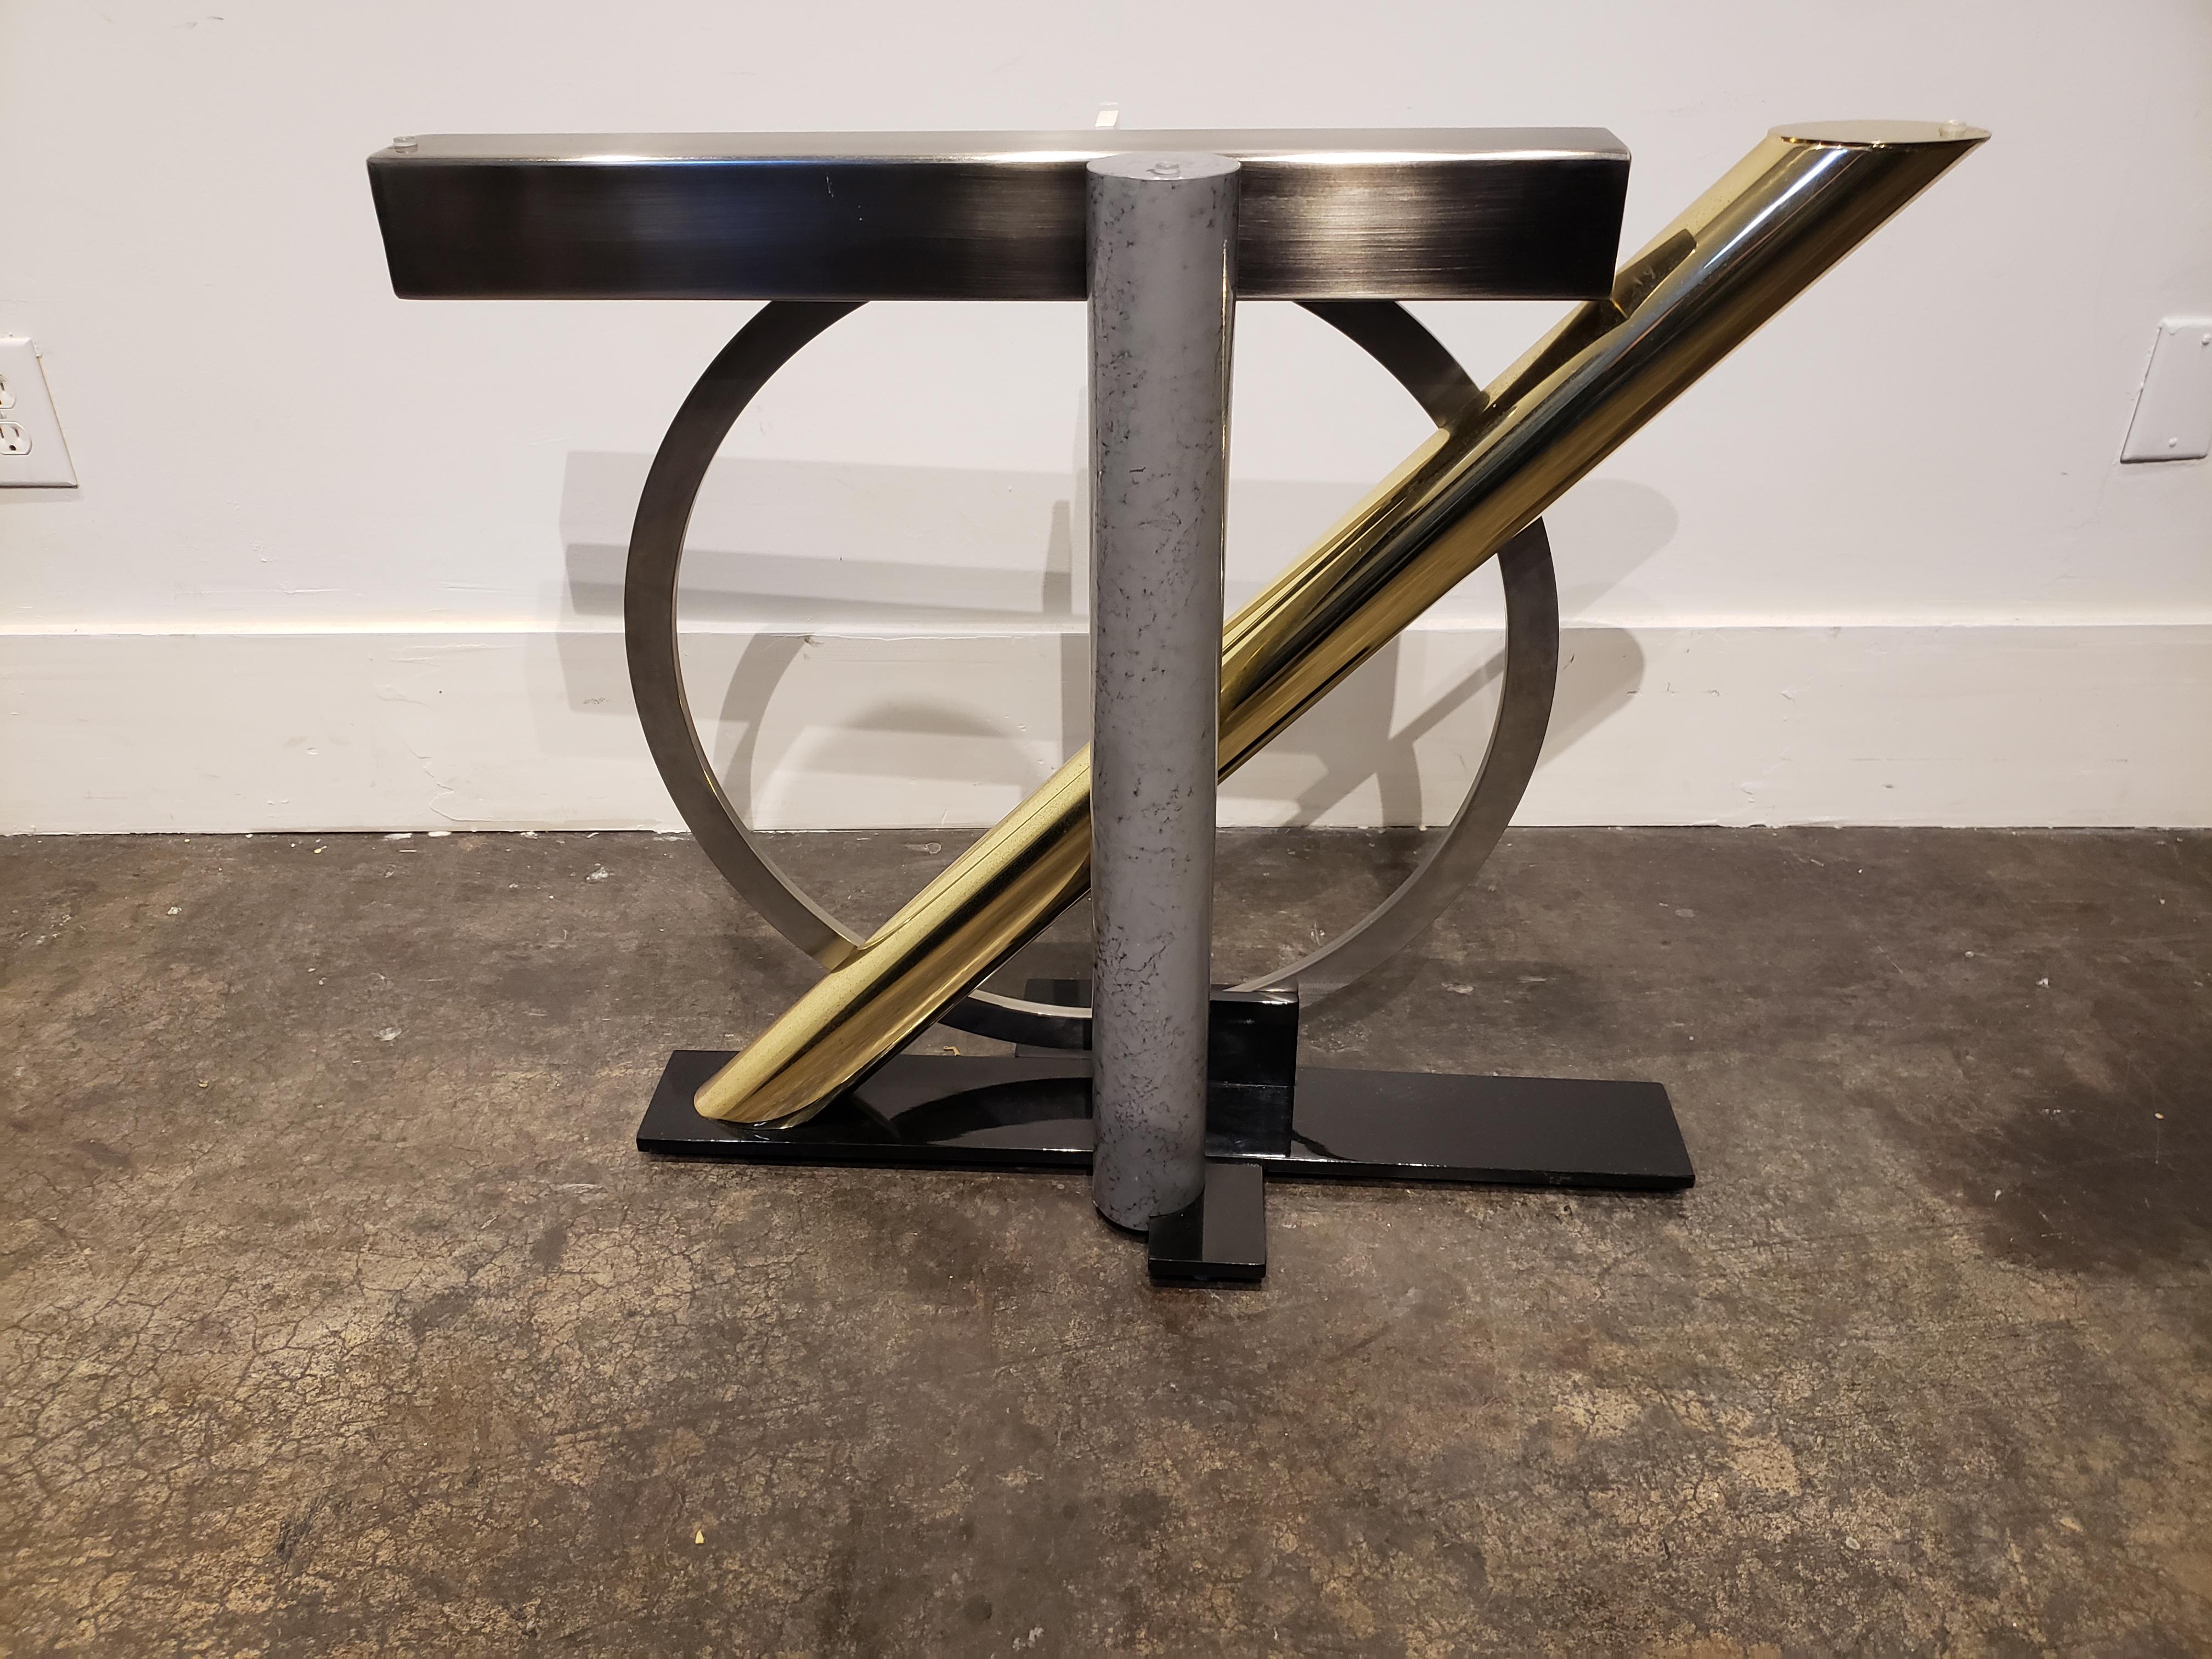 Steel 1980s Geometric Metal and Glass Memphis Style Console Table by Kaizo Oto for DIA For Sale